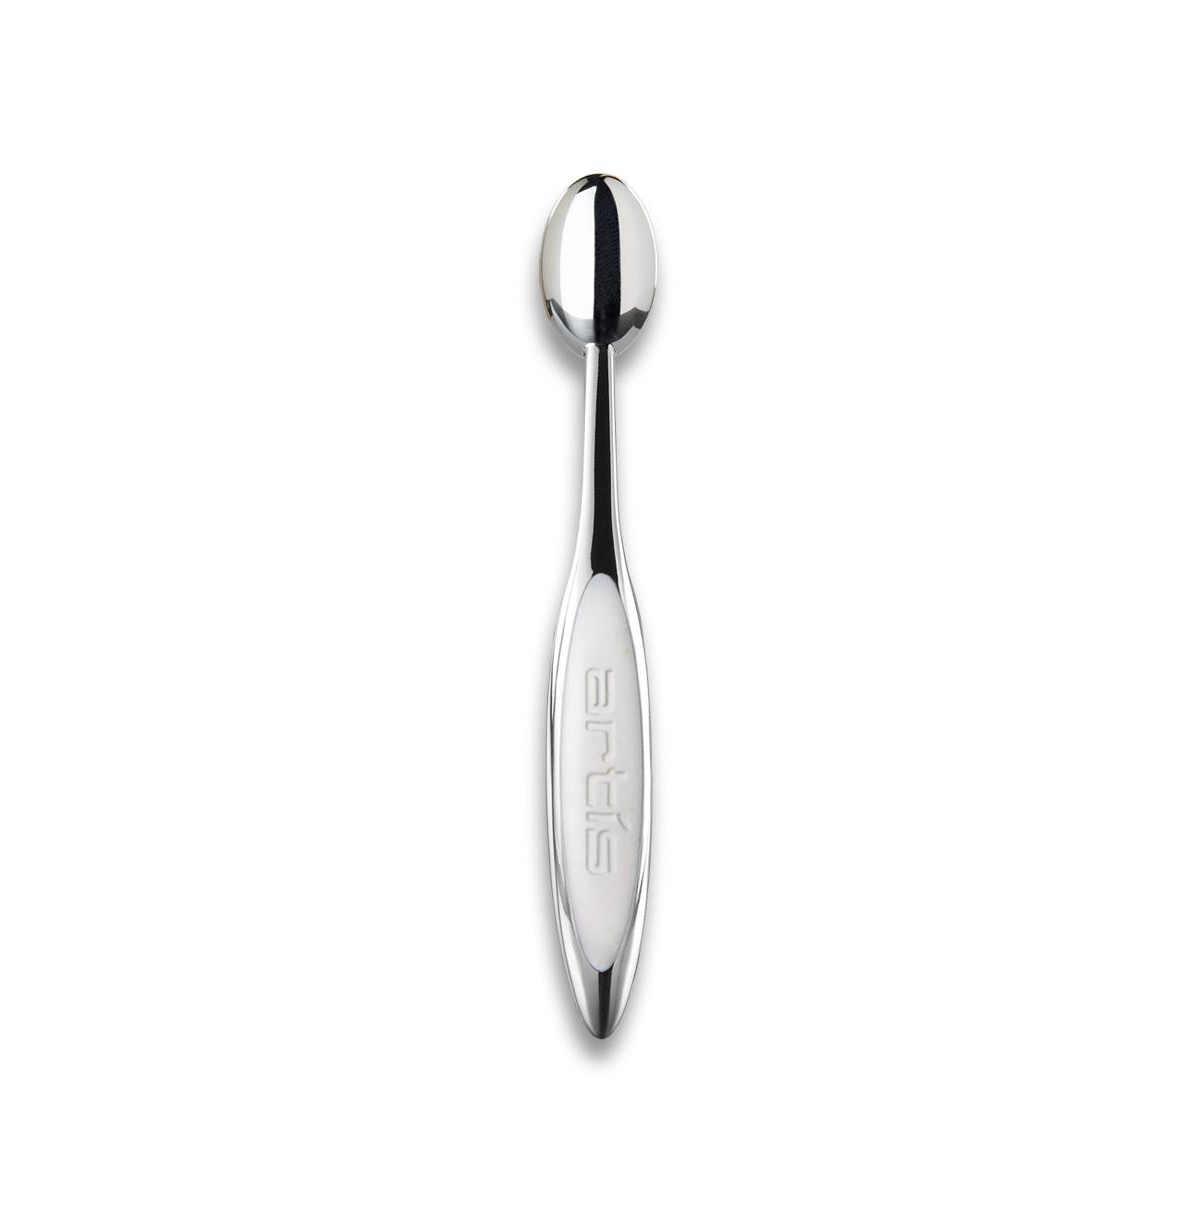 Elite Collection Oval 6 Brush - Mirror